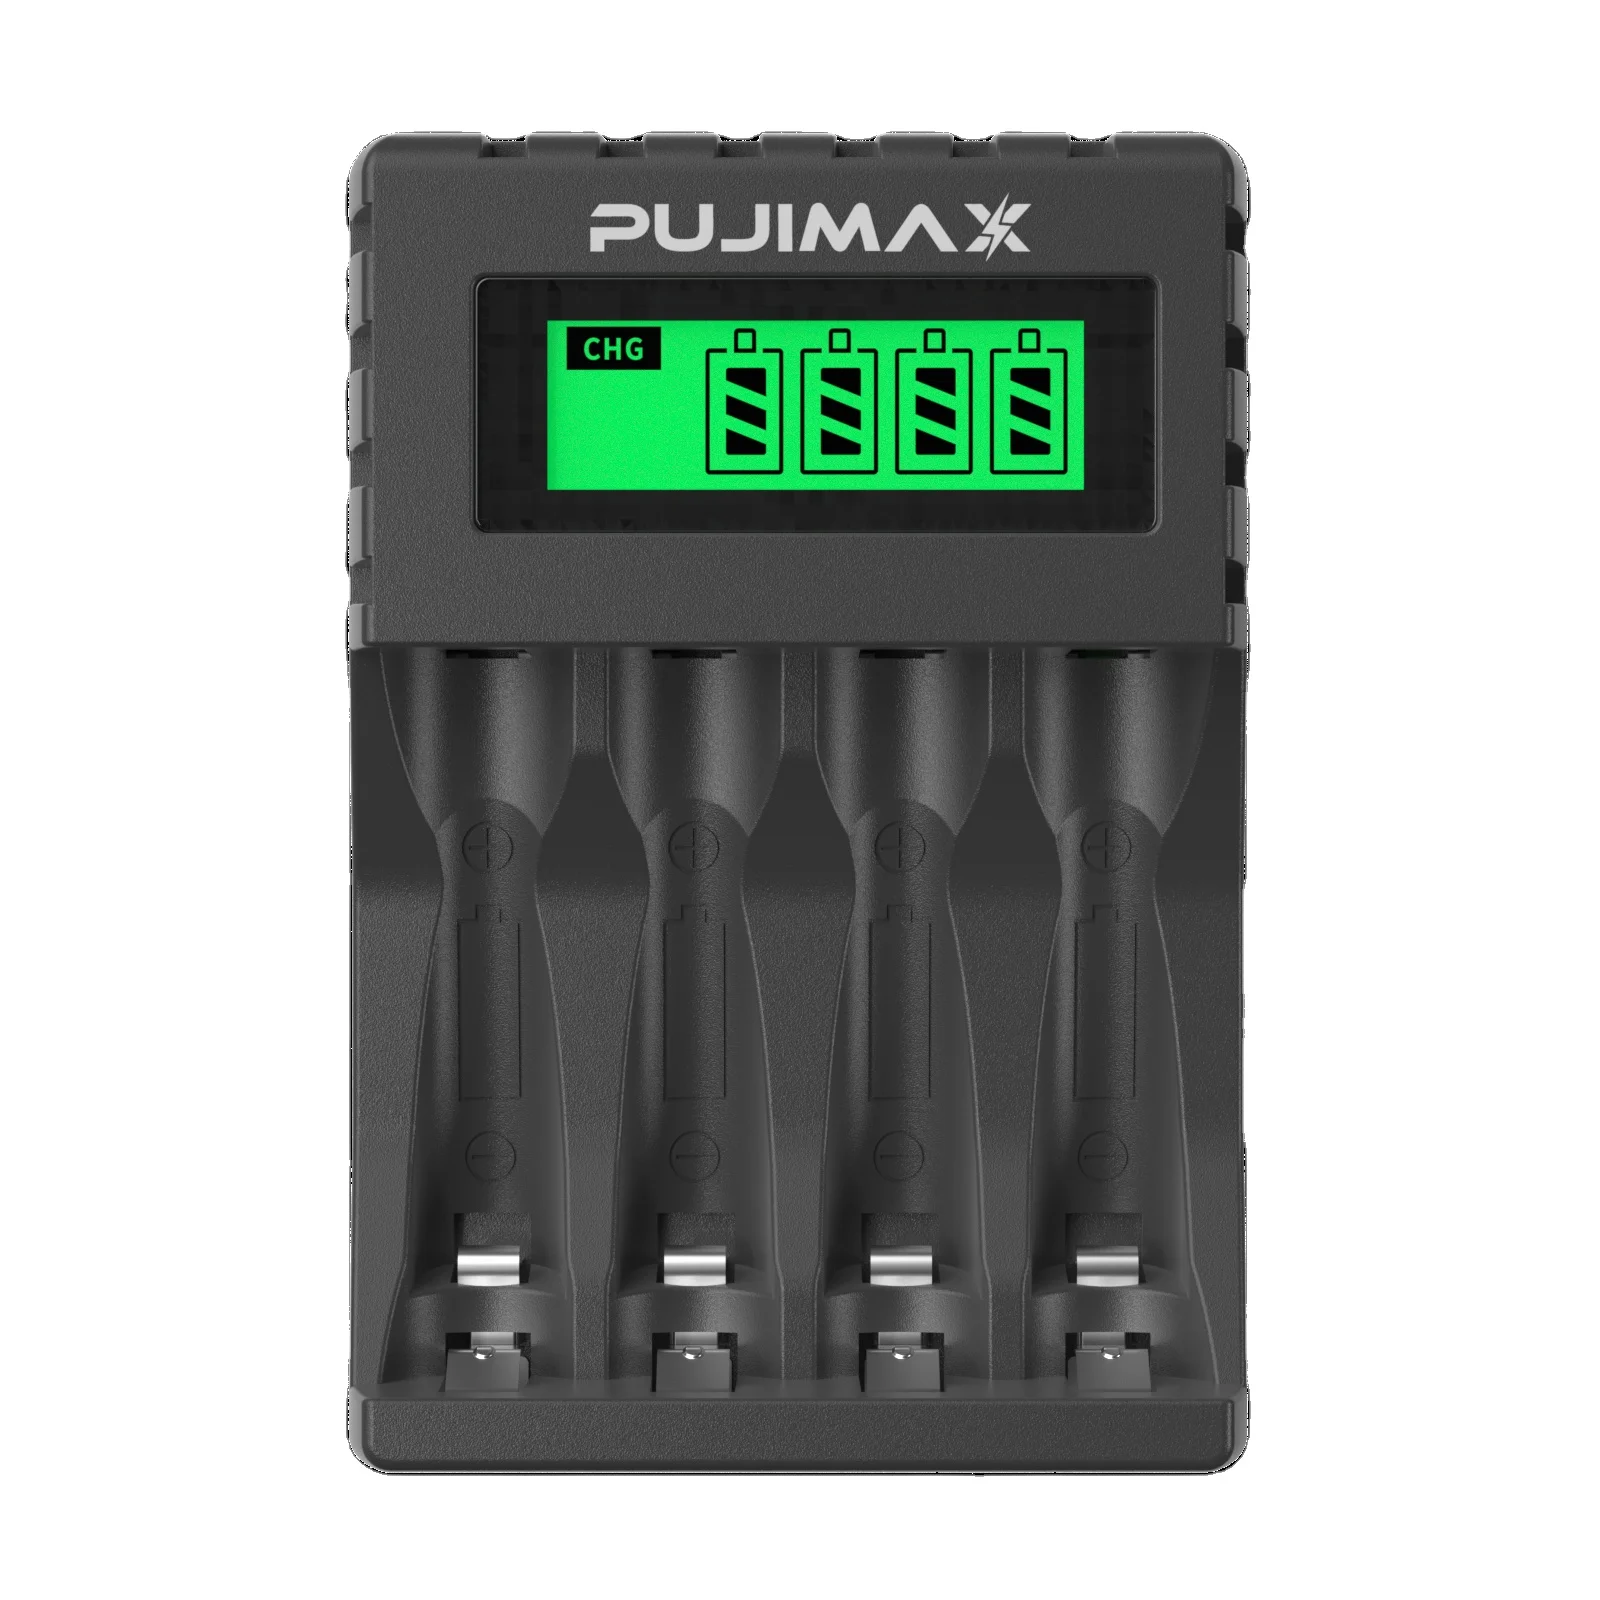 

PUJIMAX New Universal Chargers Battery Charge For Ni-MH Ni-Cd Battery 1.2v AA/AAA Rechargeable Batteries With LCD Display, Black white